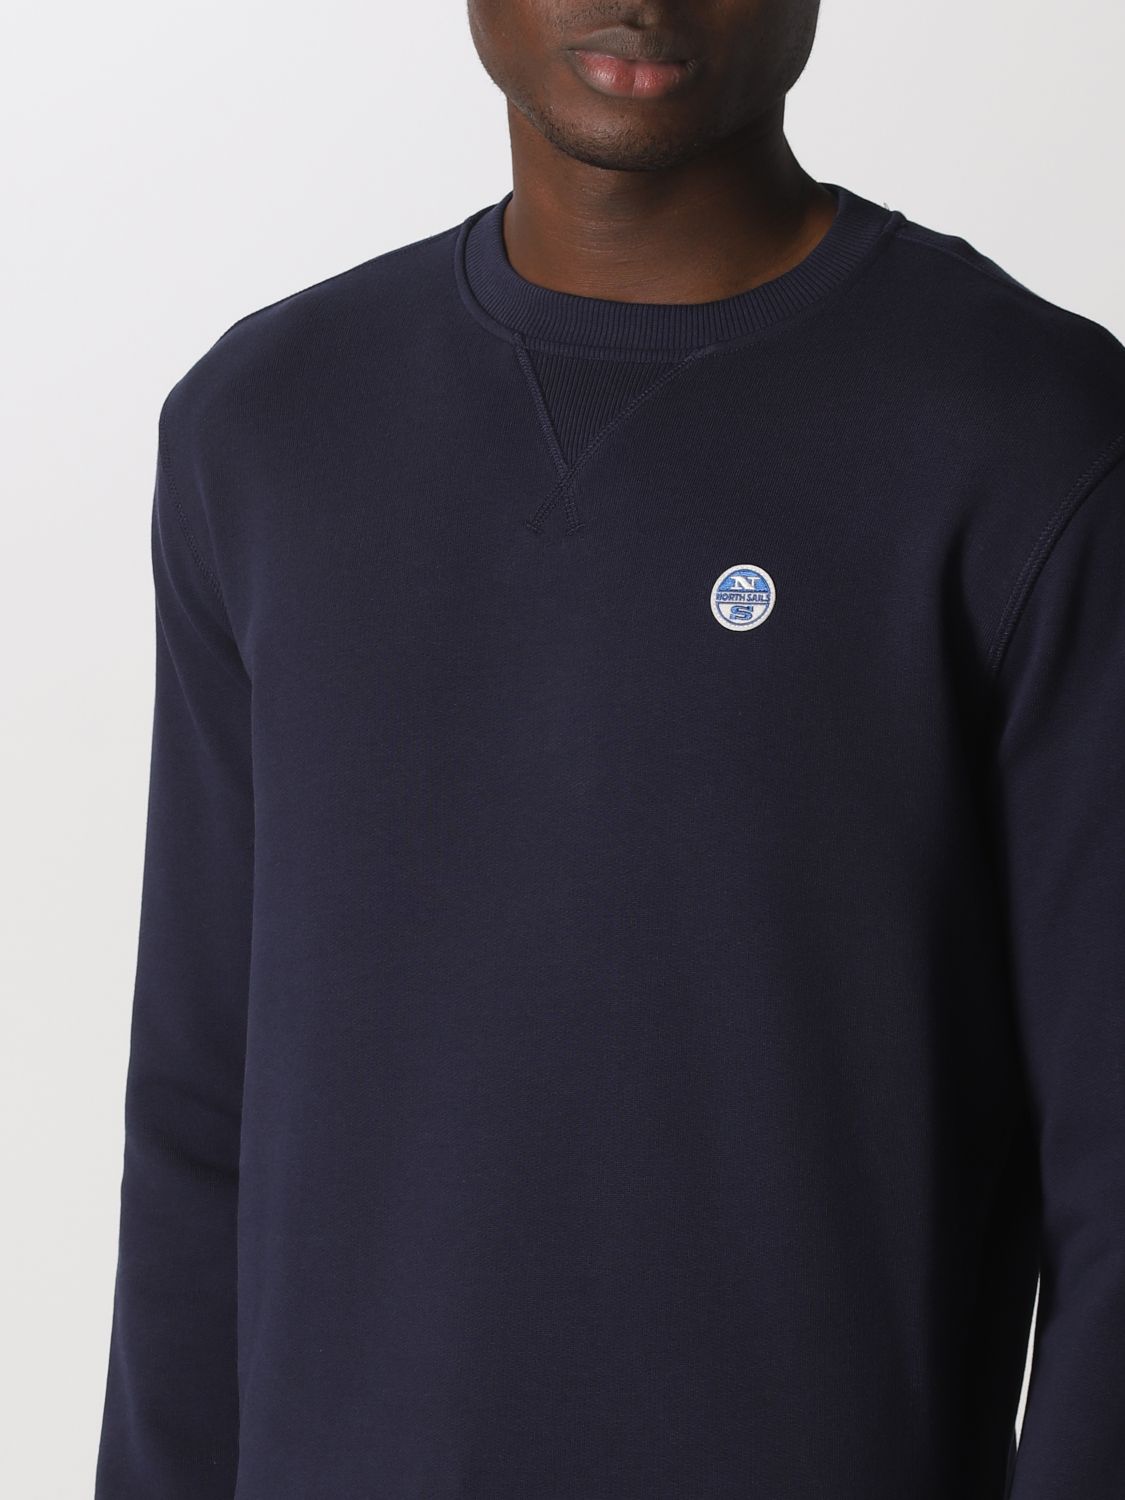 North Sails Outlet: basic sweatshirt with logo patch - Navy | North ...